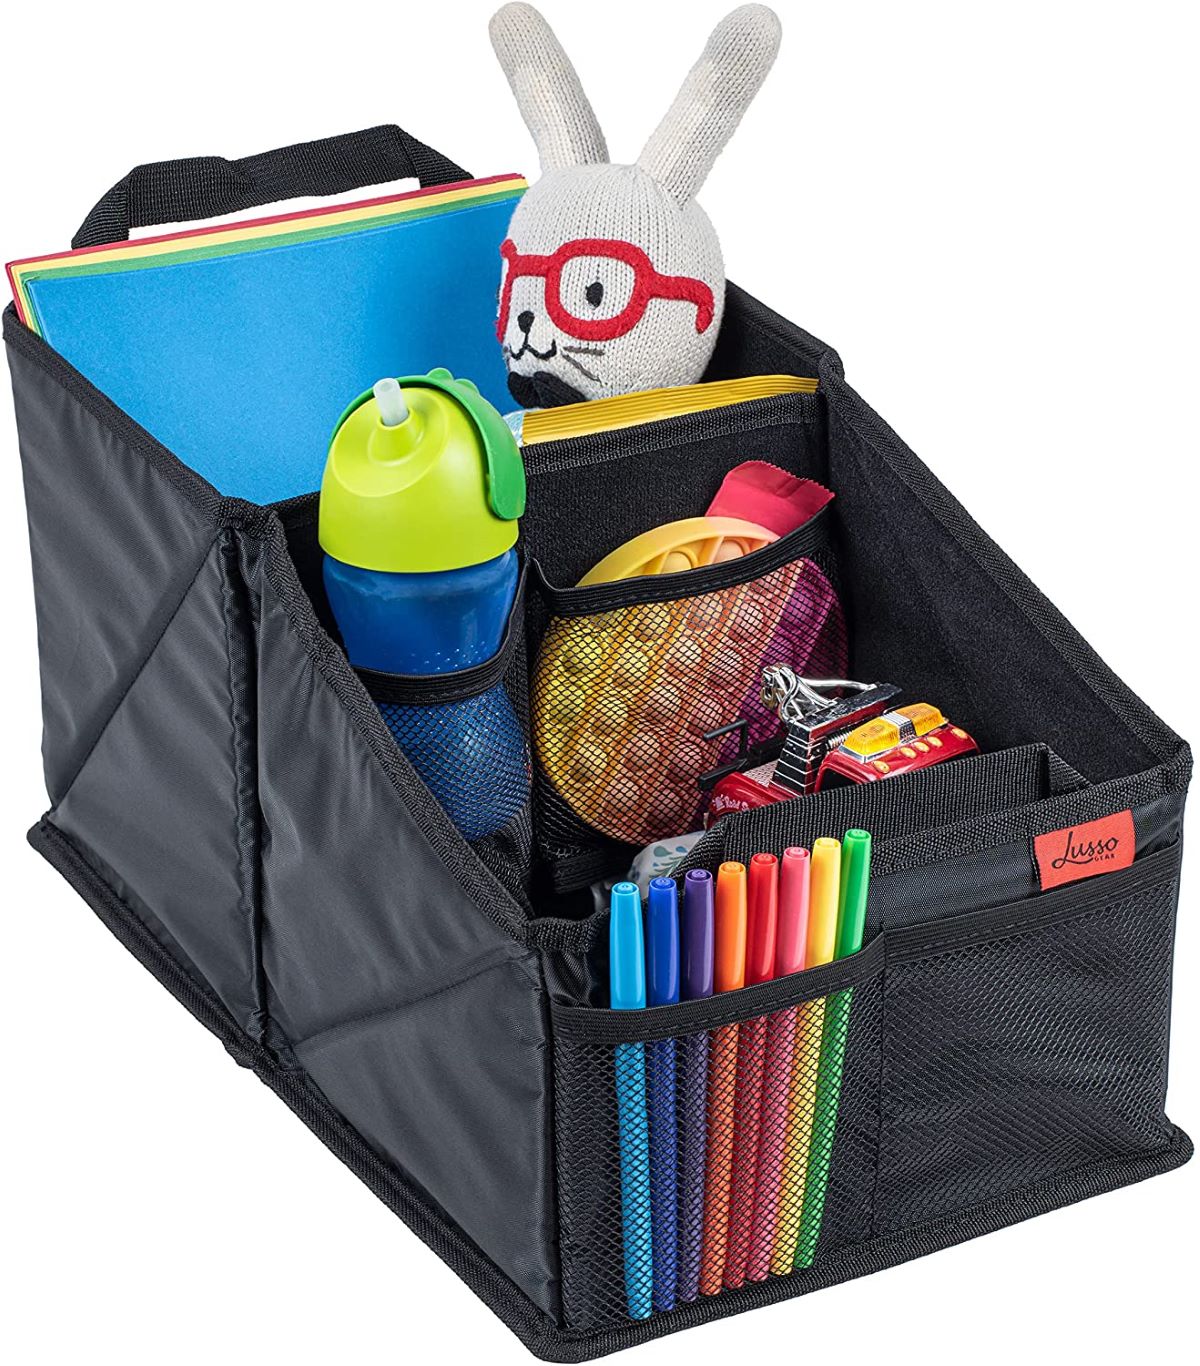 A car organizer bag filled with children's toys.  A bag like this is one of the best car storage accessories